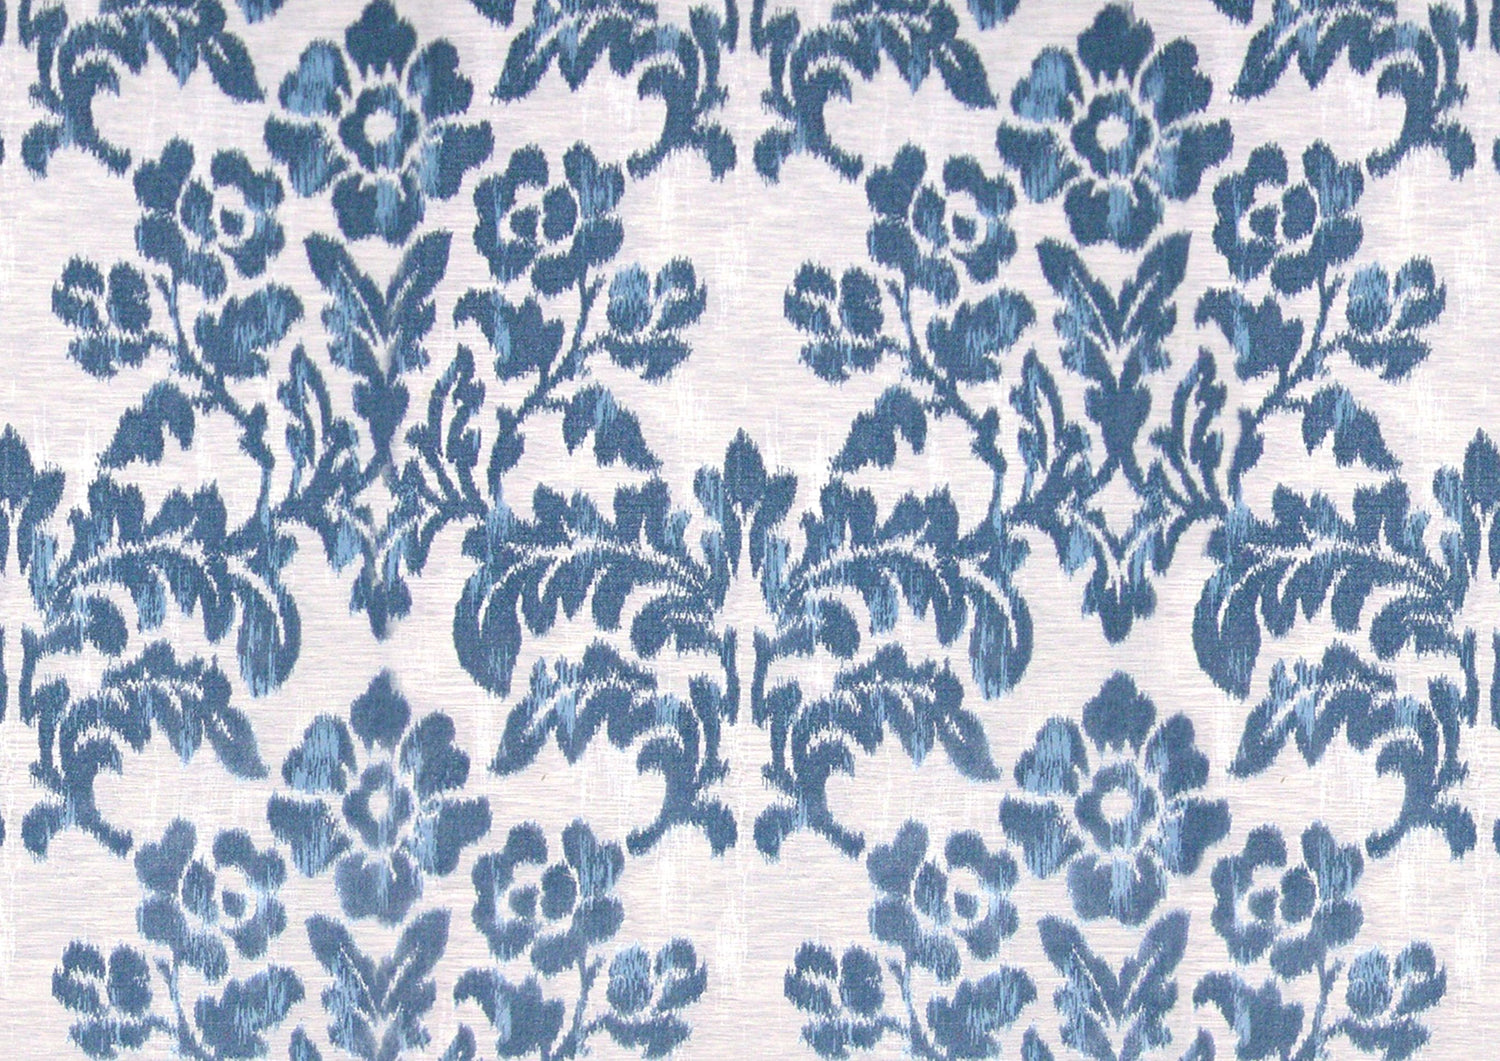 Varala fabric in tahoe blue color - pattern number V1 0002IBIZ - by Scalamandre in the Old World Weavers collection